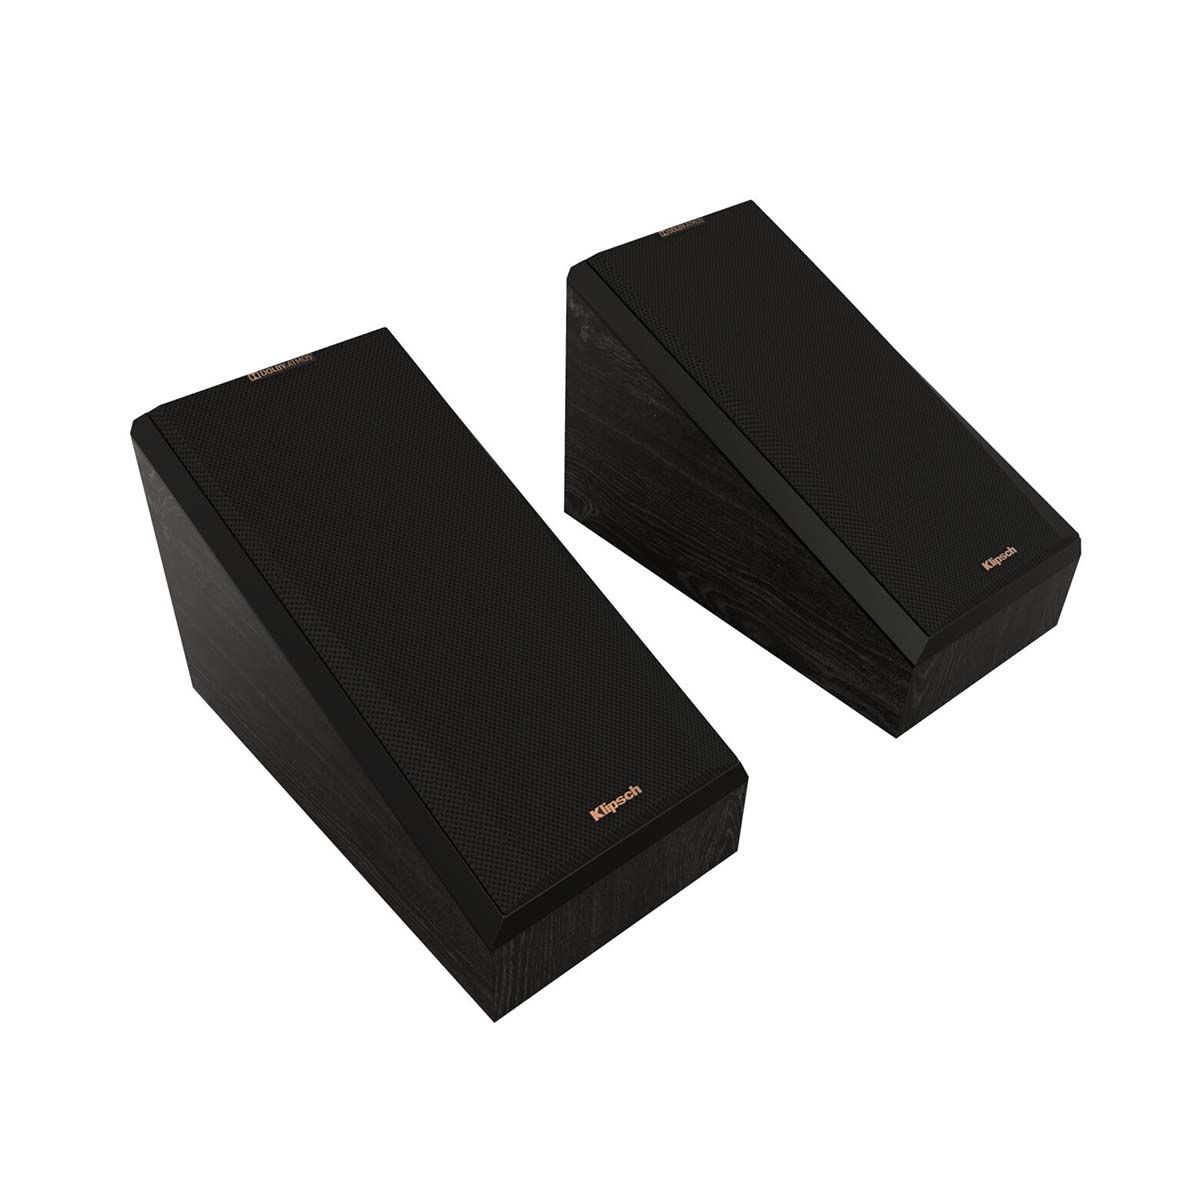 Klipsch RP-500SA II Surround/Atmos Speakers - Ebony - Pair - angled top view of pair with grills